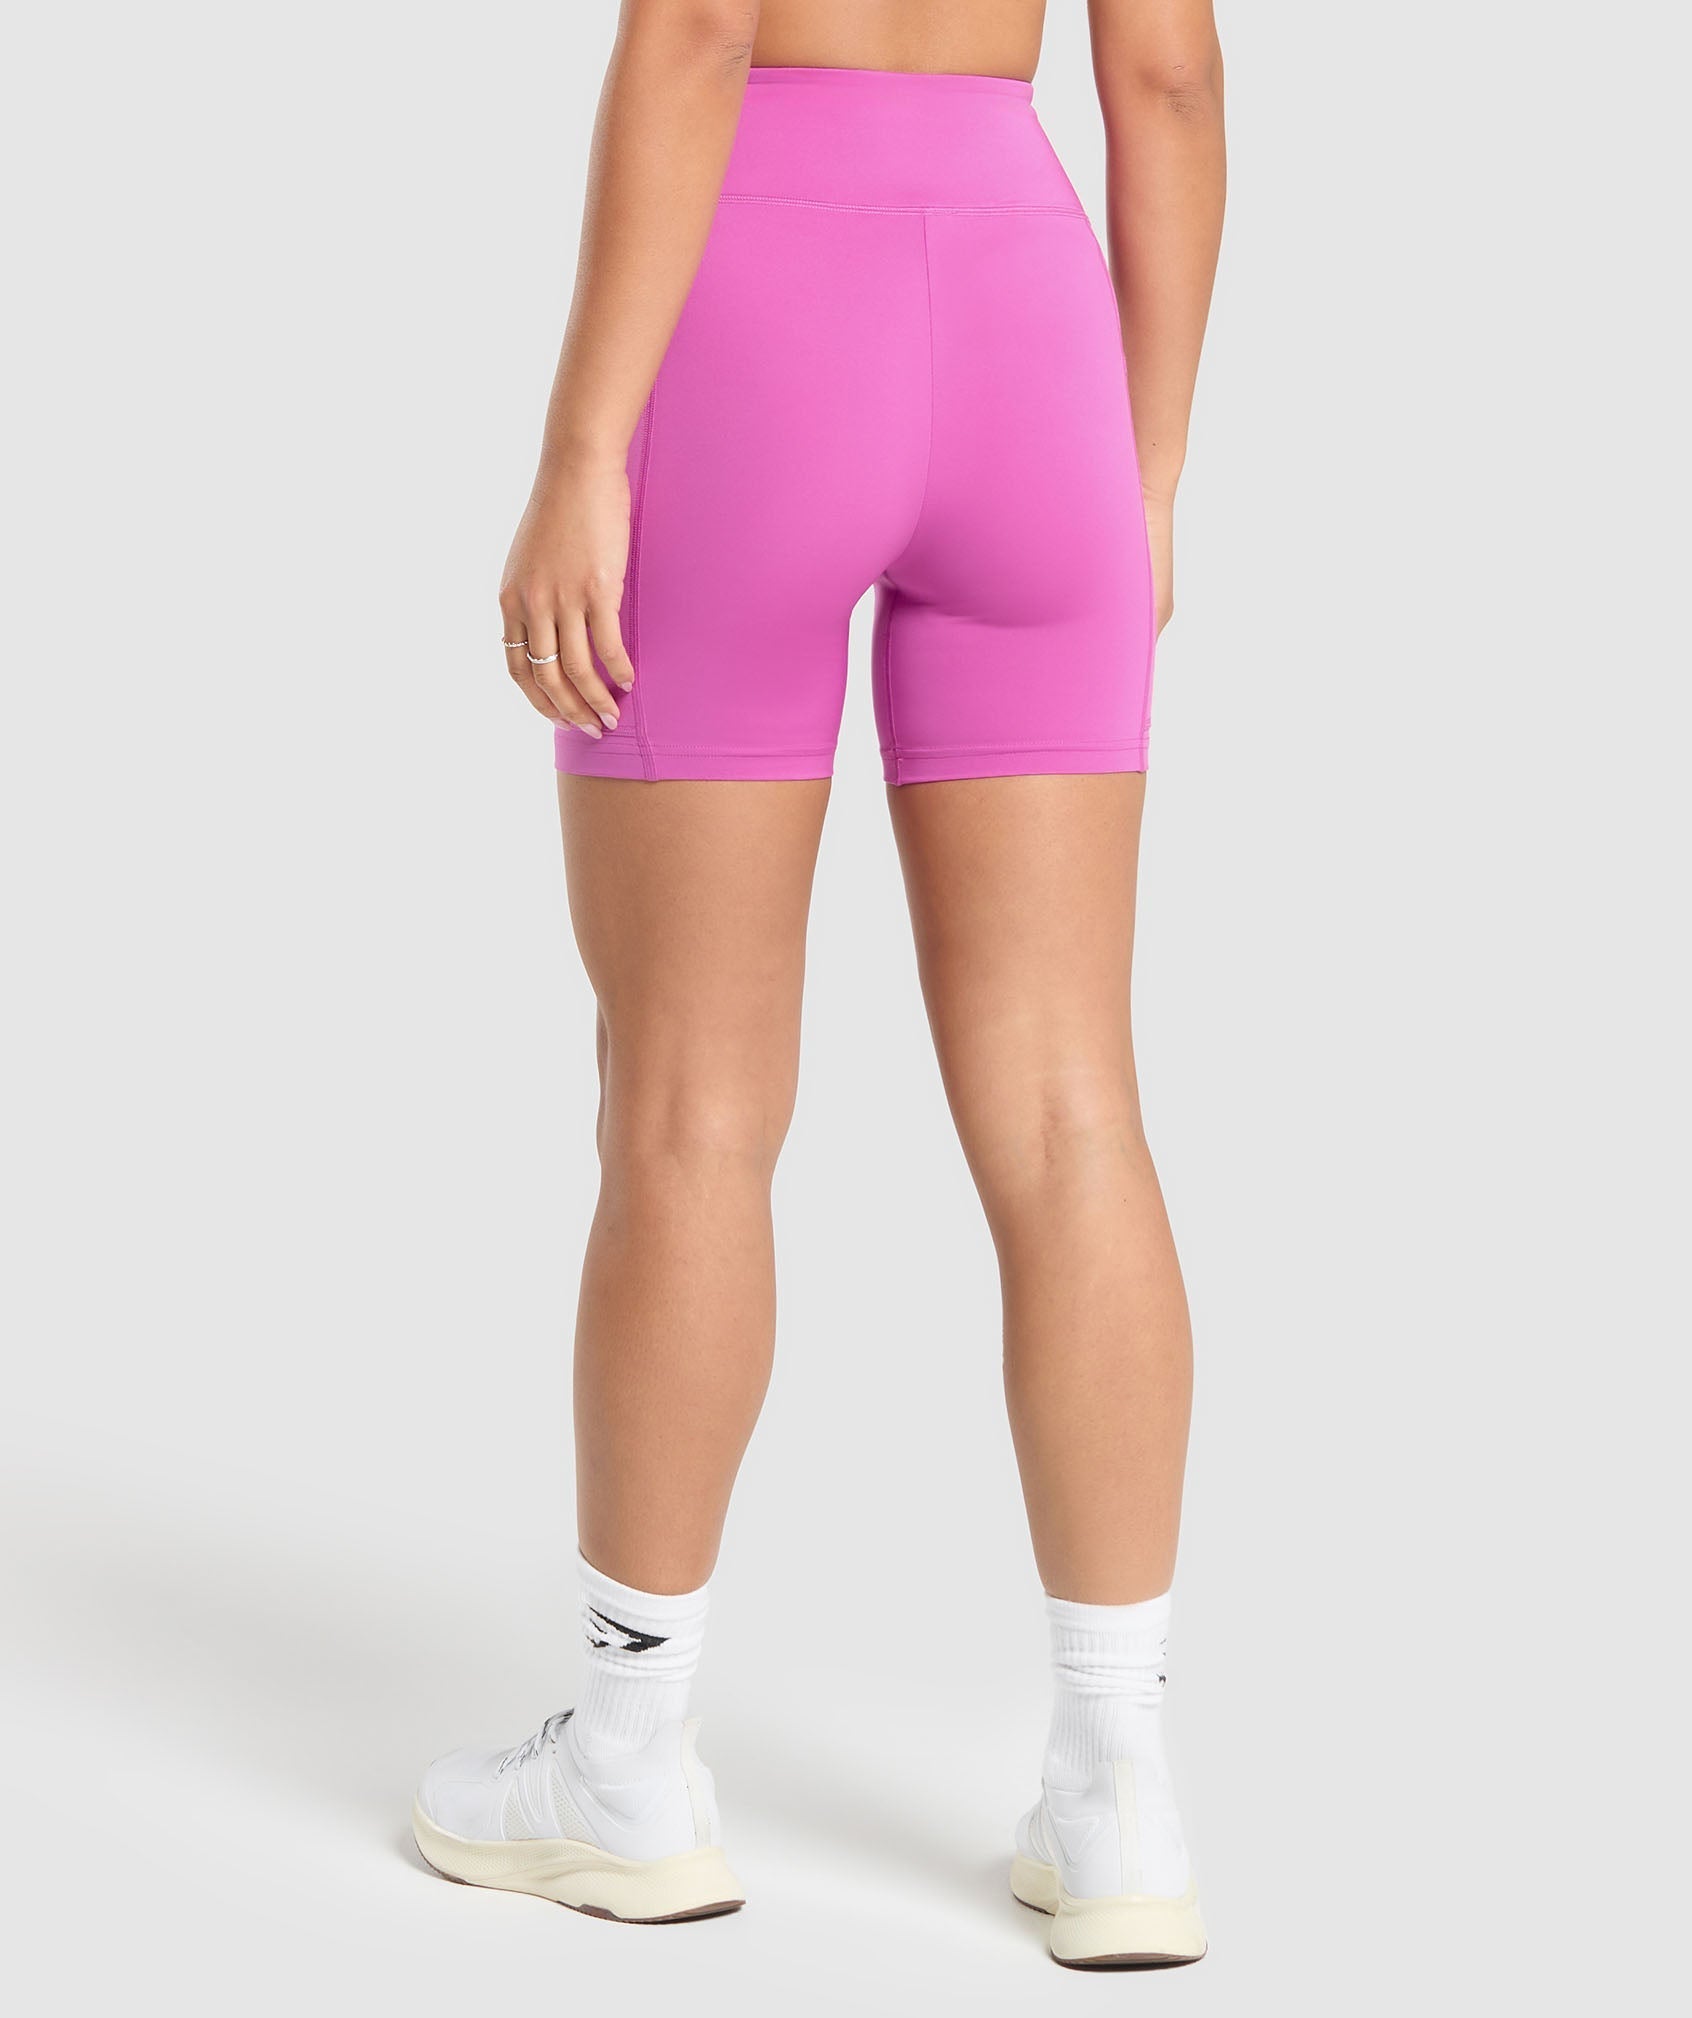 Pocket Shorts in Shelly Pink - view 3